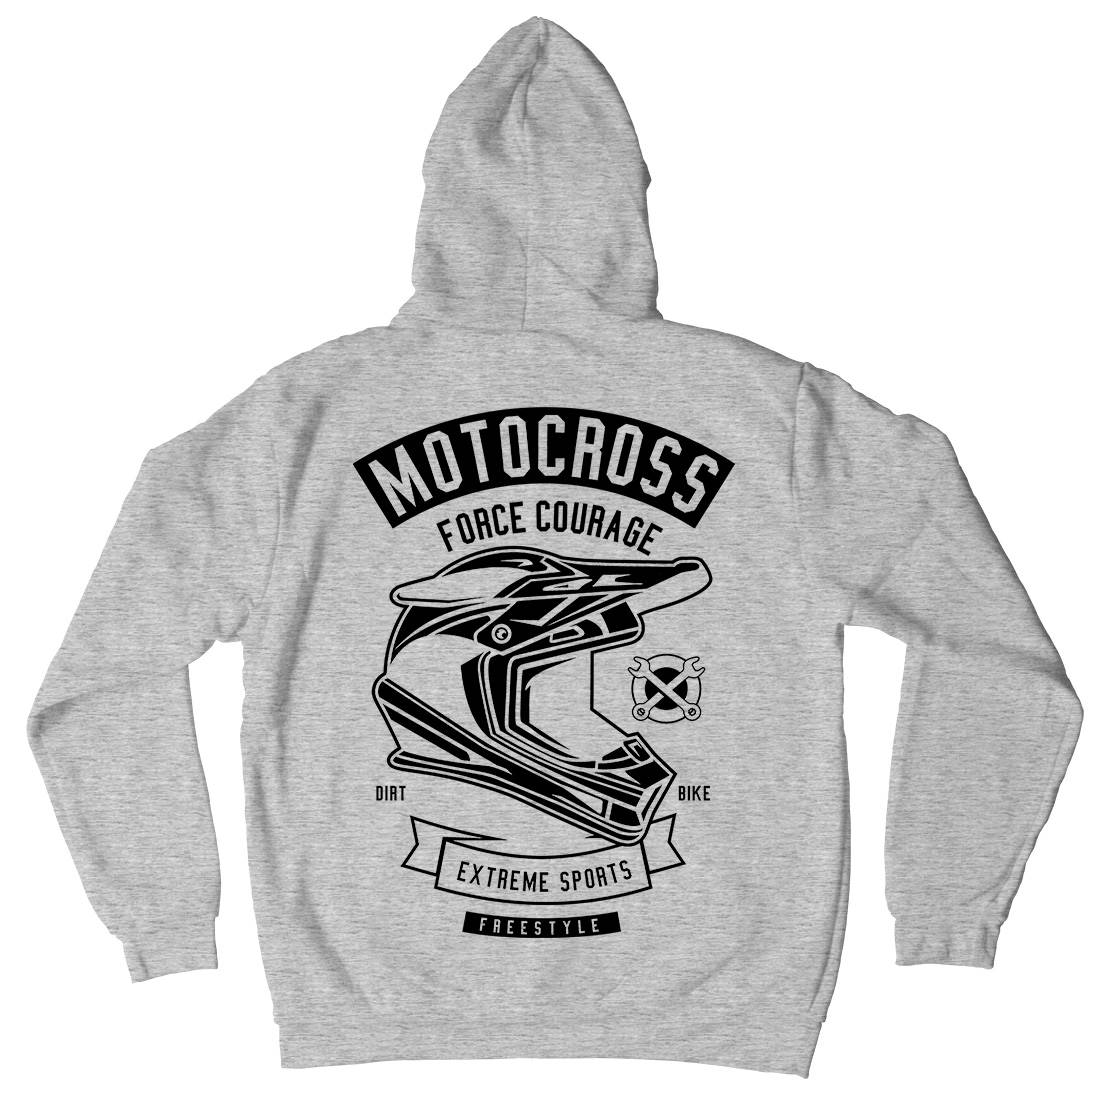 Motocross Force Courage Mens Hoodie With Pocket Motorcycles B576